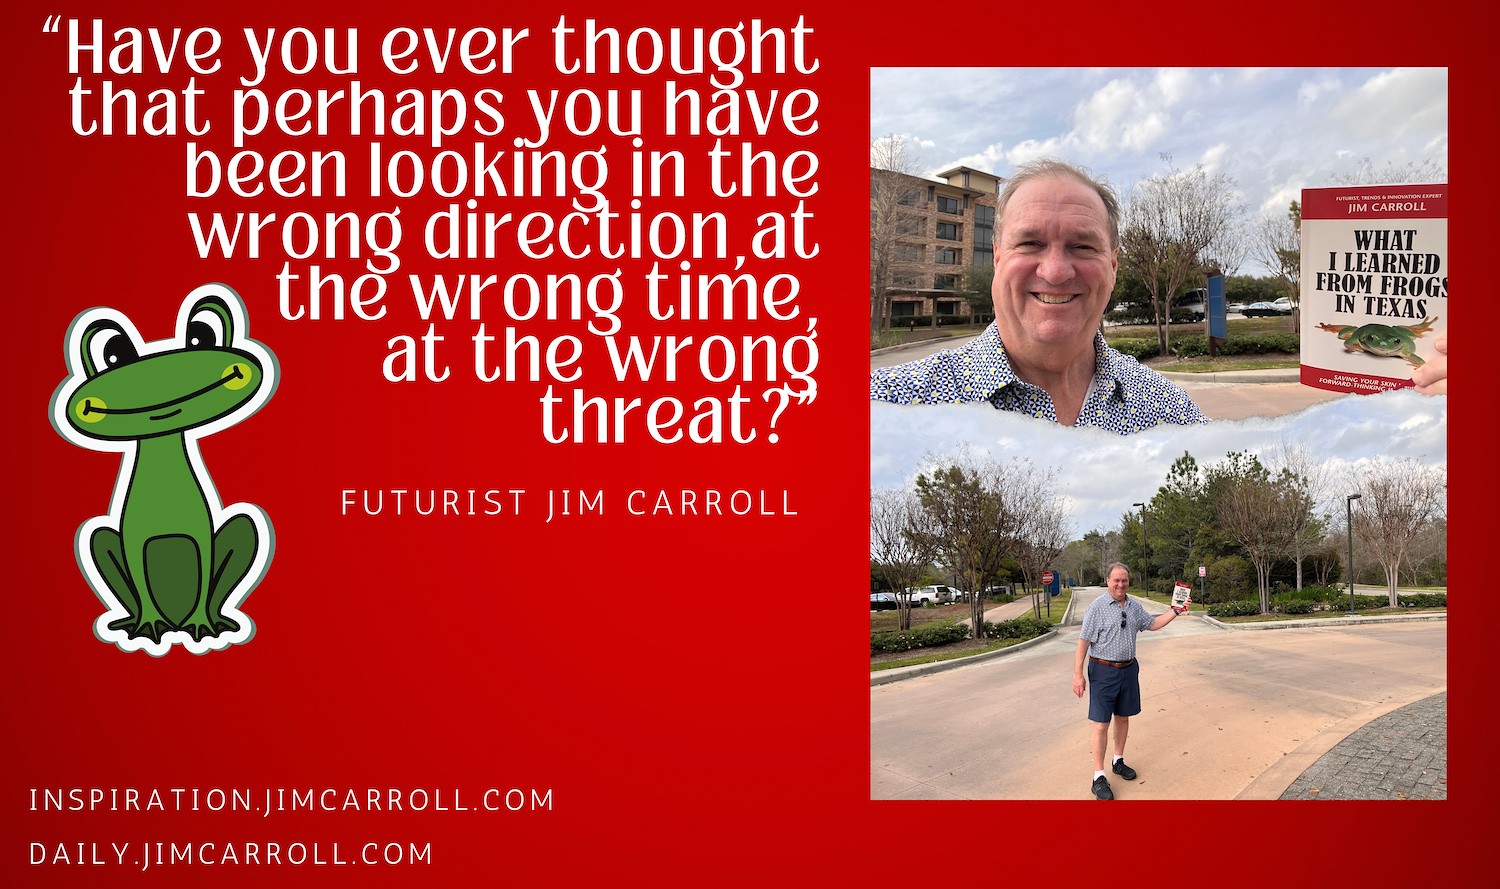 "Have you ever thought that perhaps you have been looking in the wrong direction, at the wrong time, at the wrong threat?" - Futurist Jim Carroll